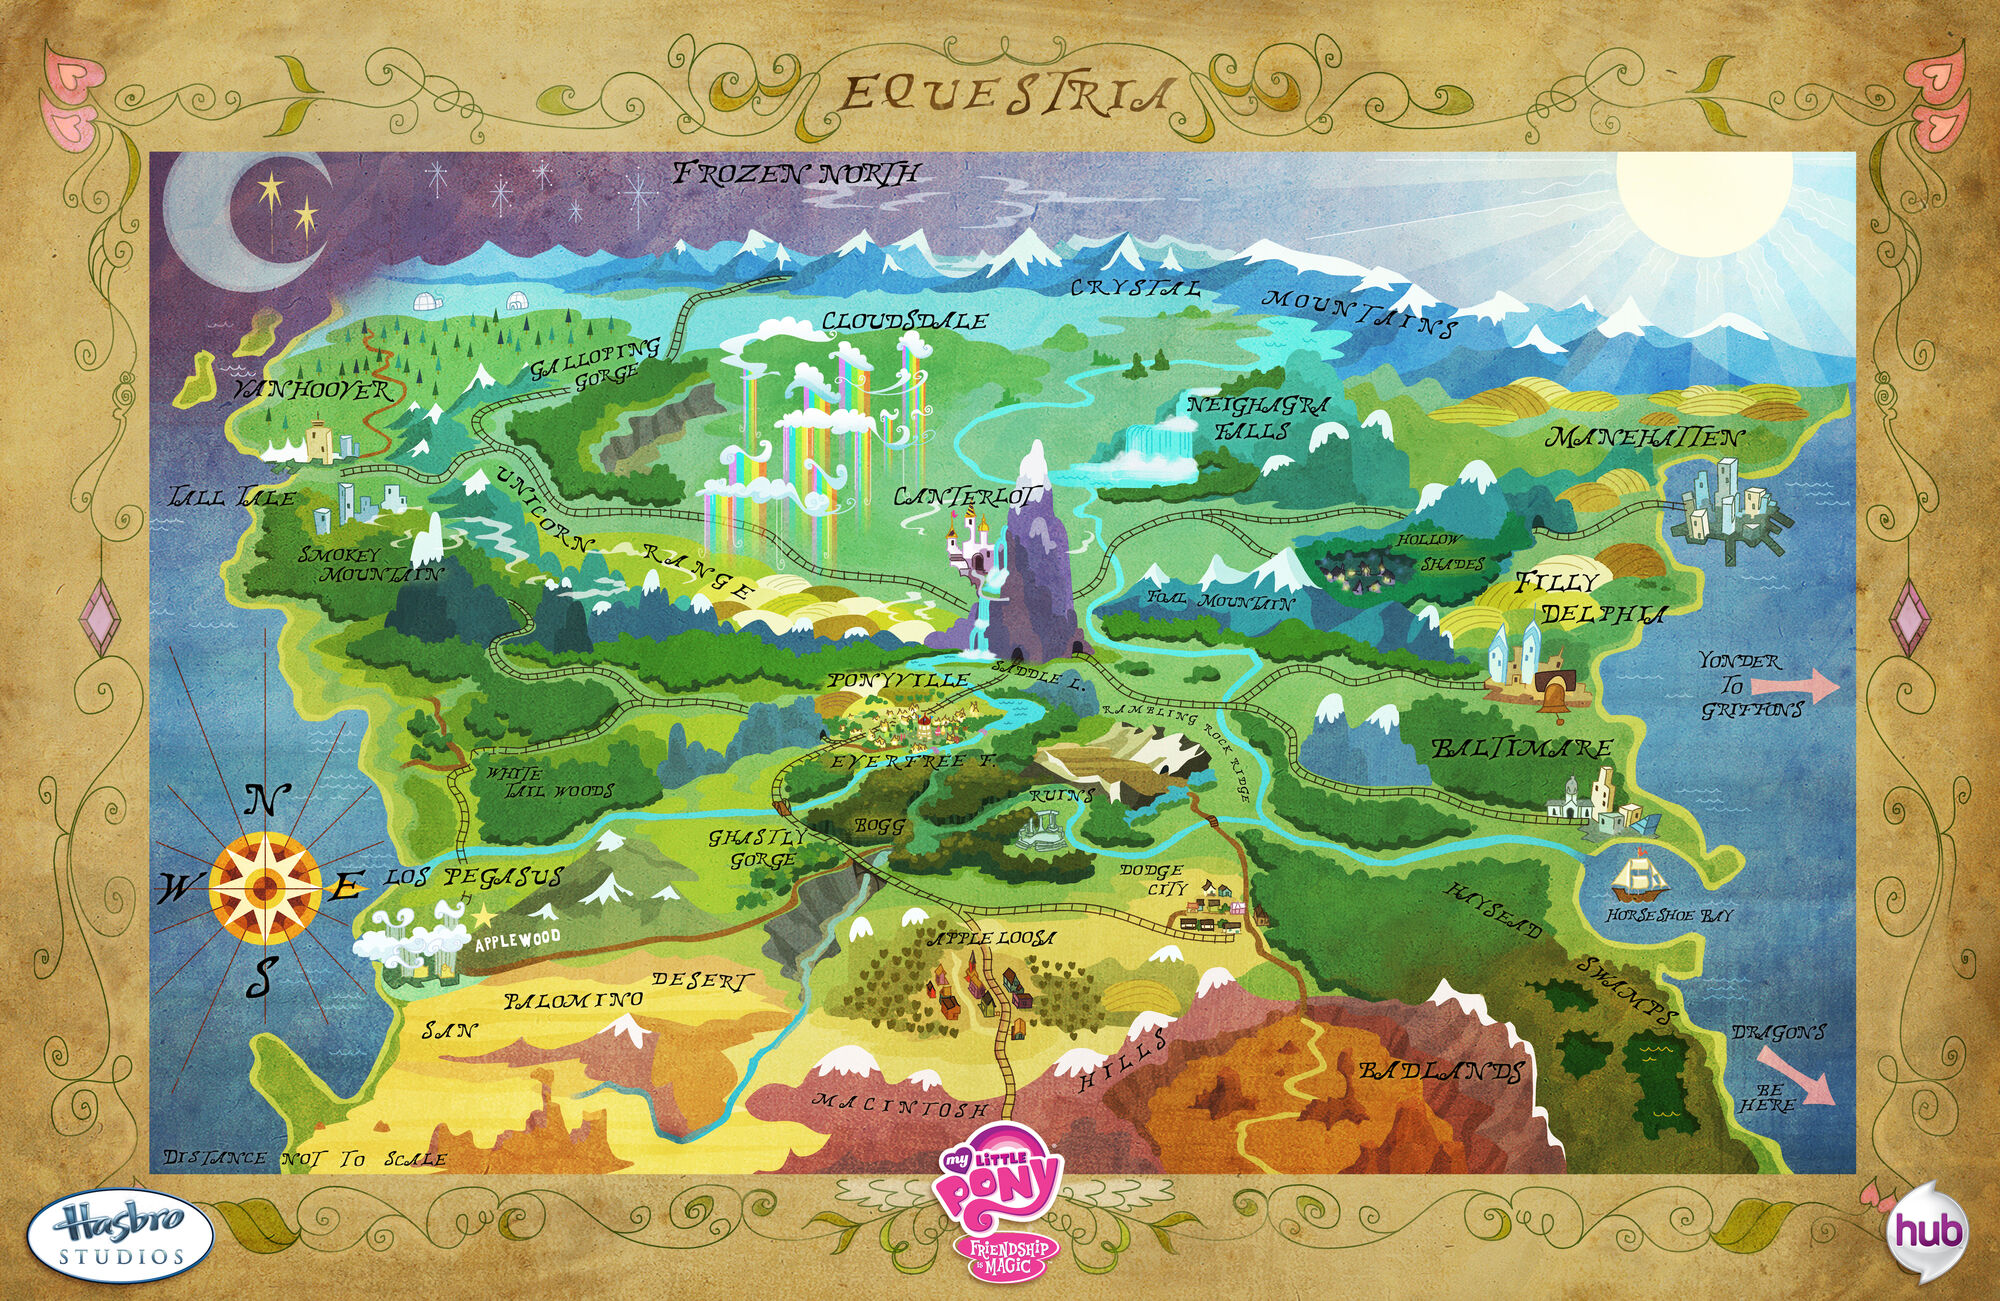 Image Map of Equestria online version 201208.jpg My Little Pony